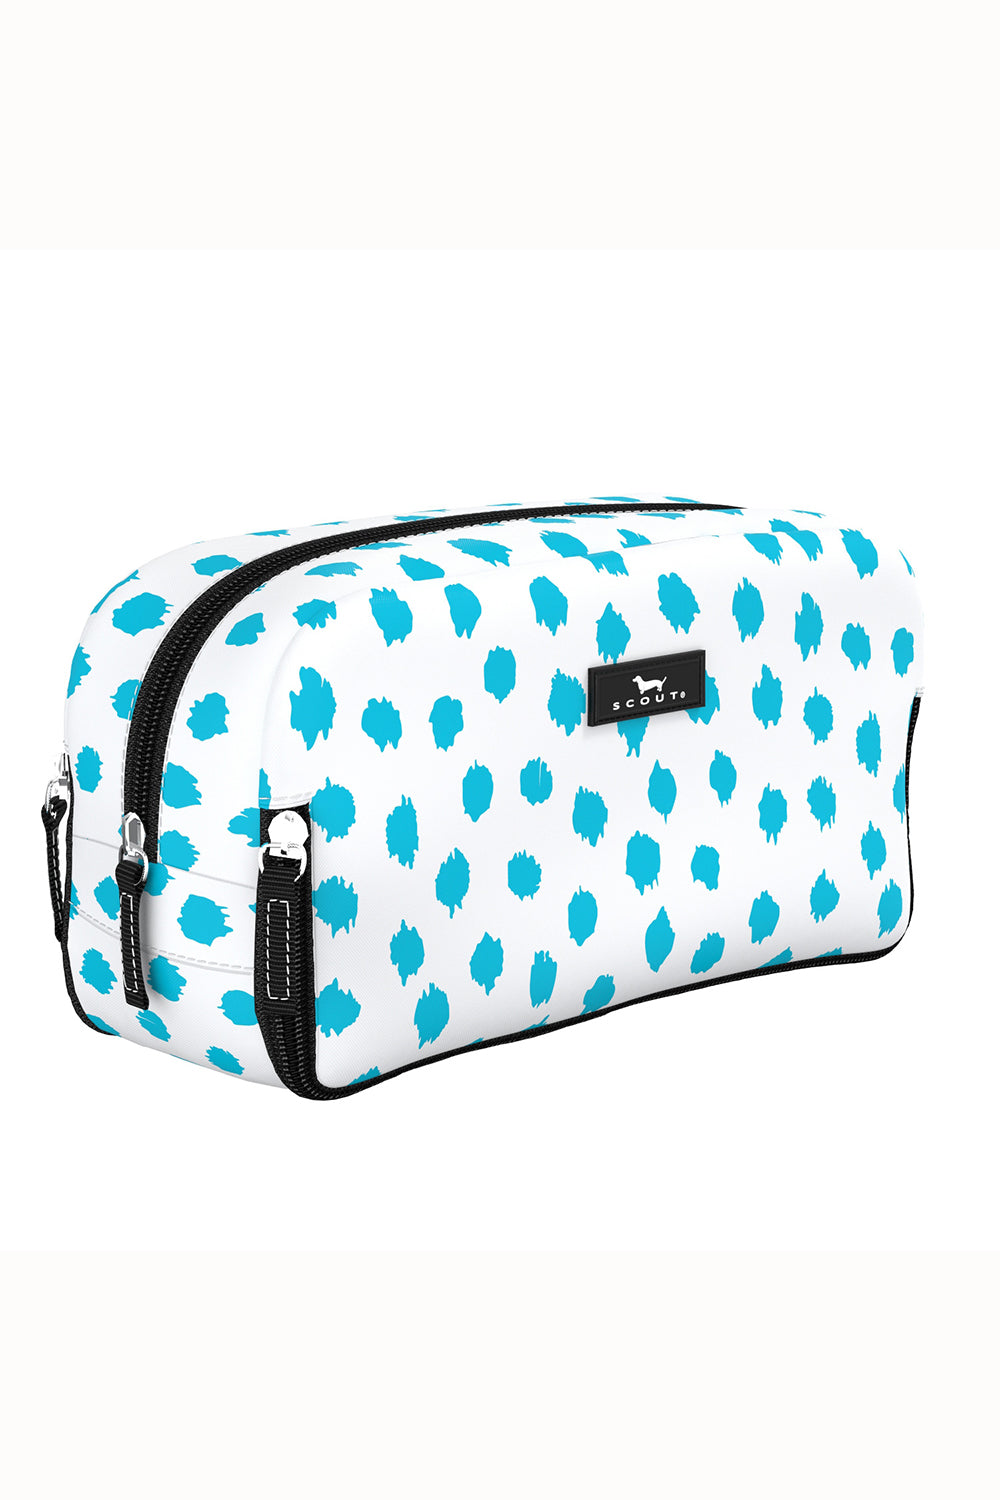 3 Way Cosmetic Bag - "Puddle Jumper" SUM23